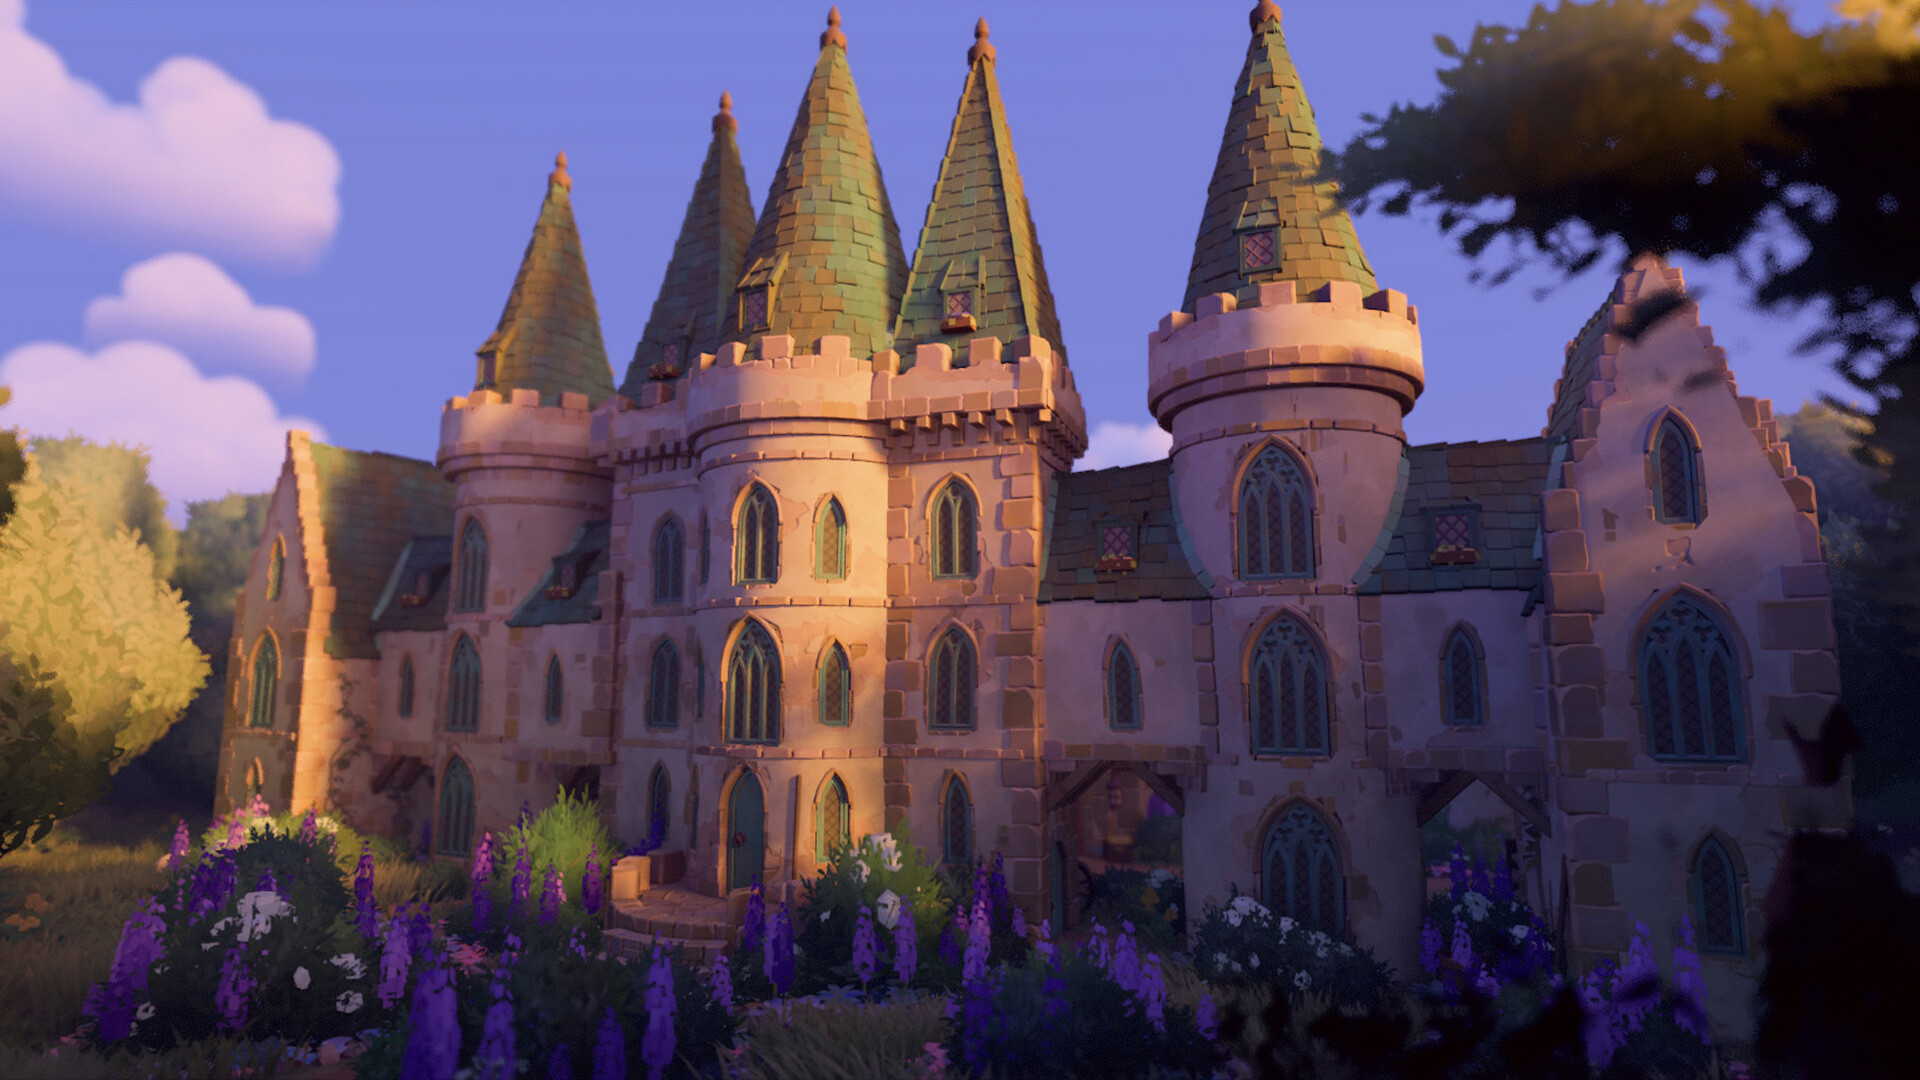 A screenshot from the game "Tiny Glade:" a castle surrounded by purple flowers